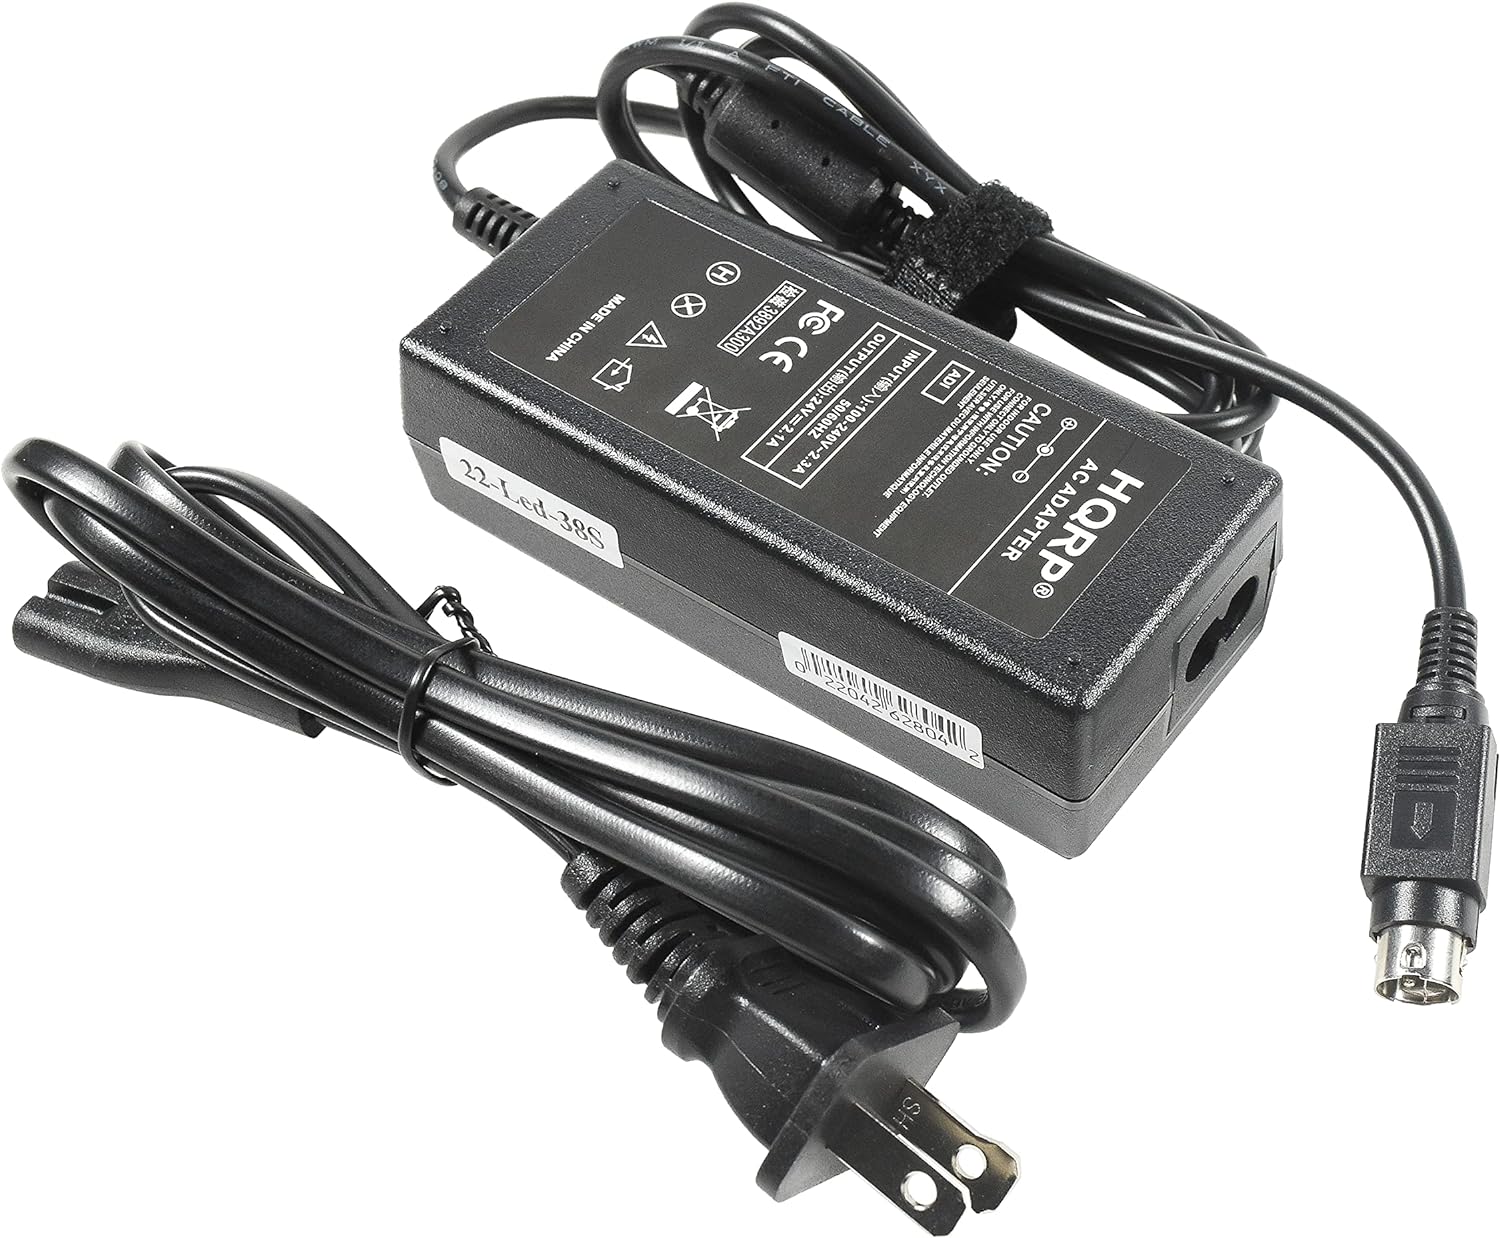 AC Adapter Compatible with Epson PS-180 PS-170 PS-150 PSA242 C32C825343 M159A M159B M235A M129C TM-U220 TM-U230 TM-U295